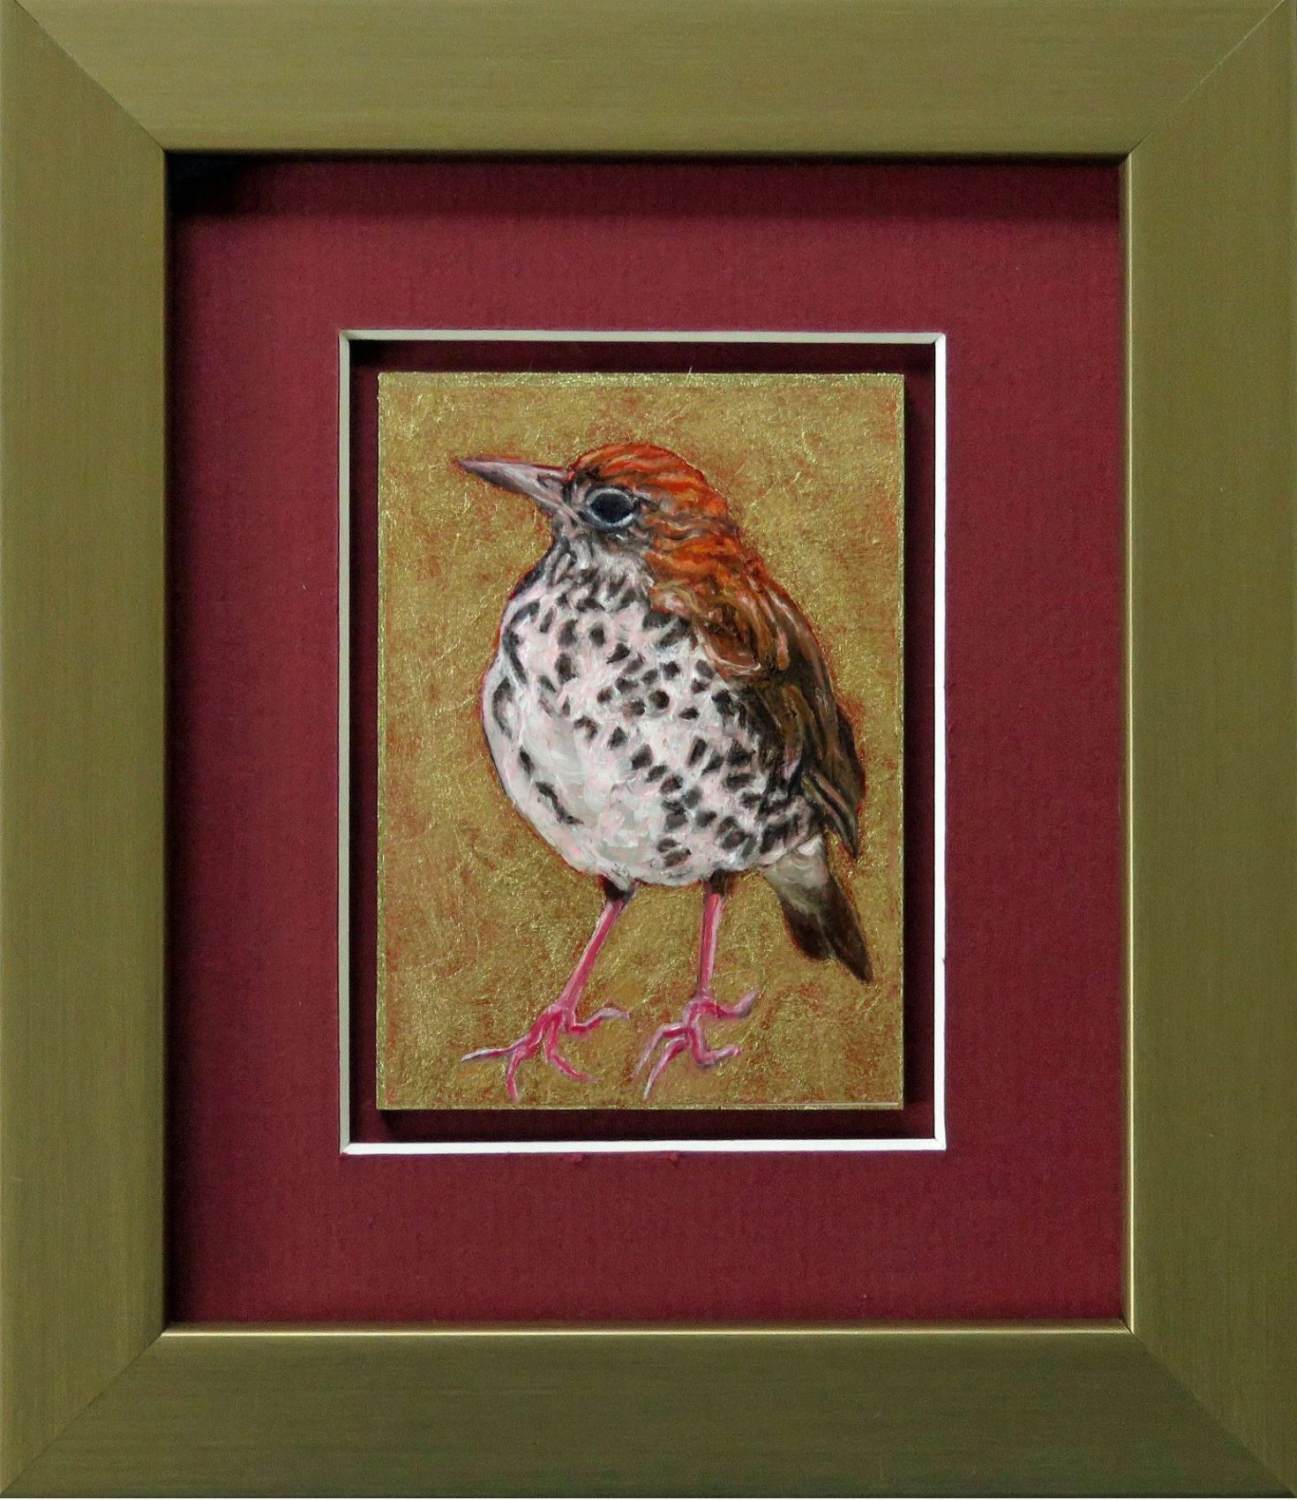 laureen-marchand-small-wonders-imperious-thrush-framed-climate-change-art-bird-painting-online-gallery